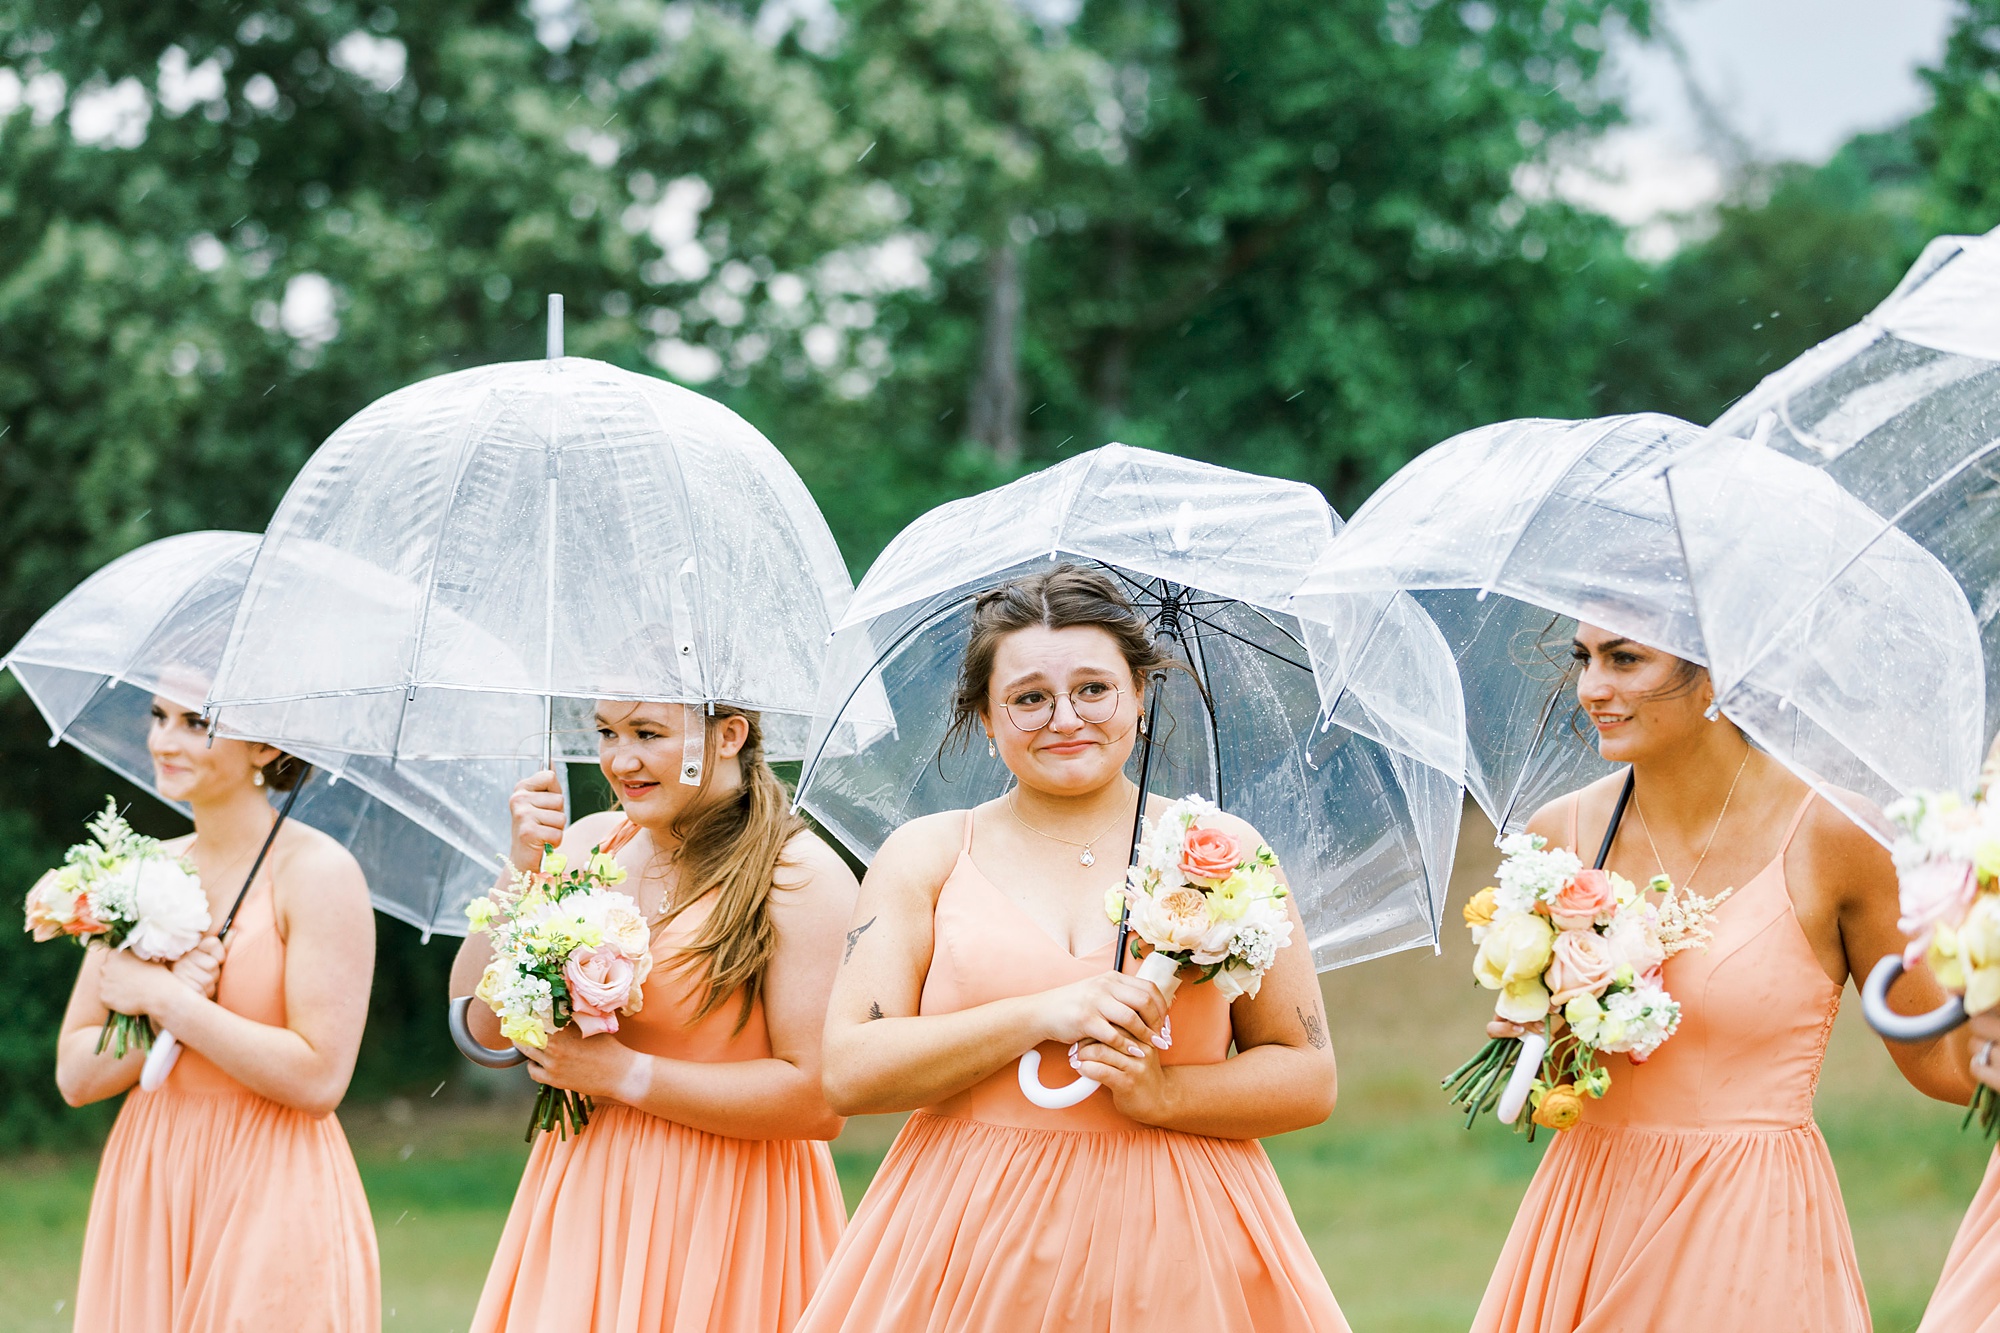 Rainy Wedding Day Must-Haves: my favorite Amazon finds to keep rainy wedding days dry shared by NC wedding photographer Kevyn Dixon. 